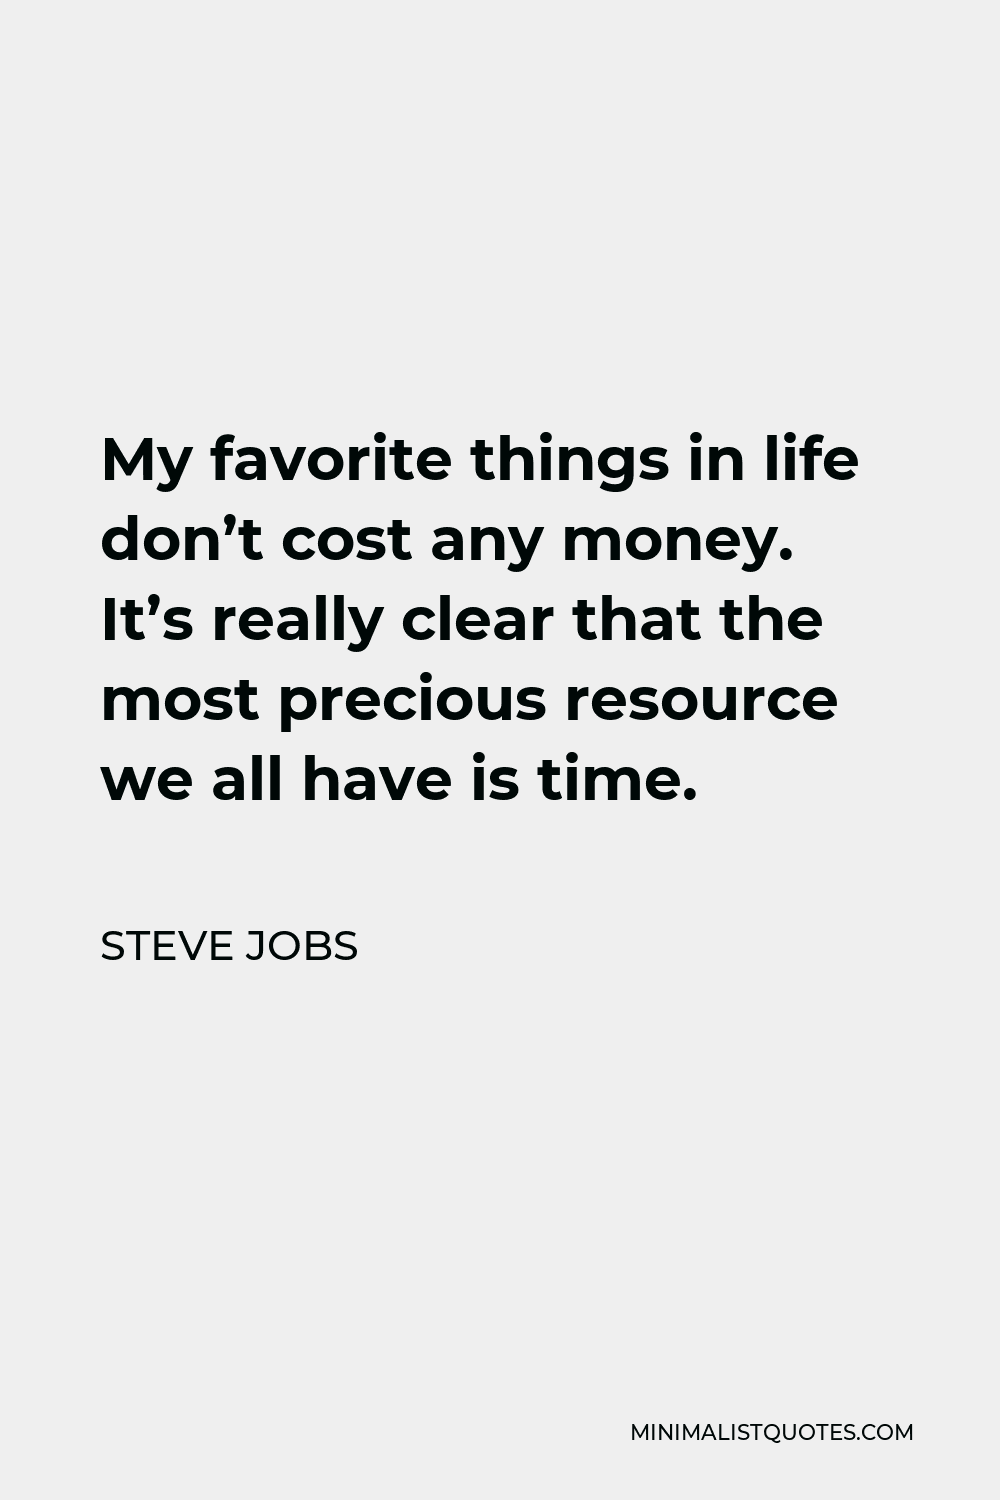 Steve Jobs Quote - My favorite things in life don’t cost any money. It’s really clear that the most precious resource we all have is time.